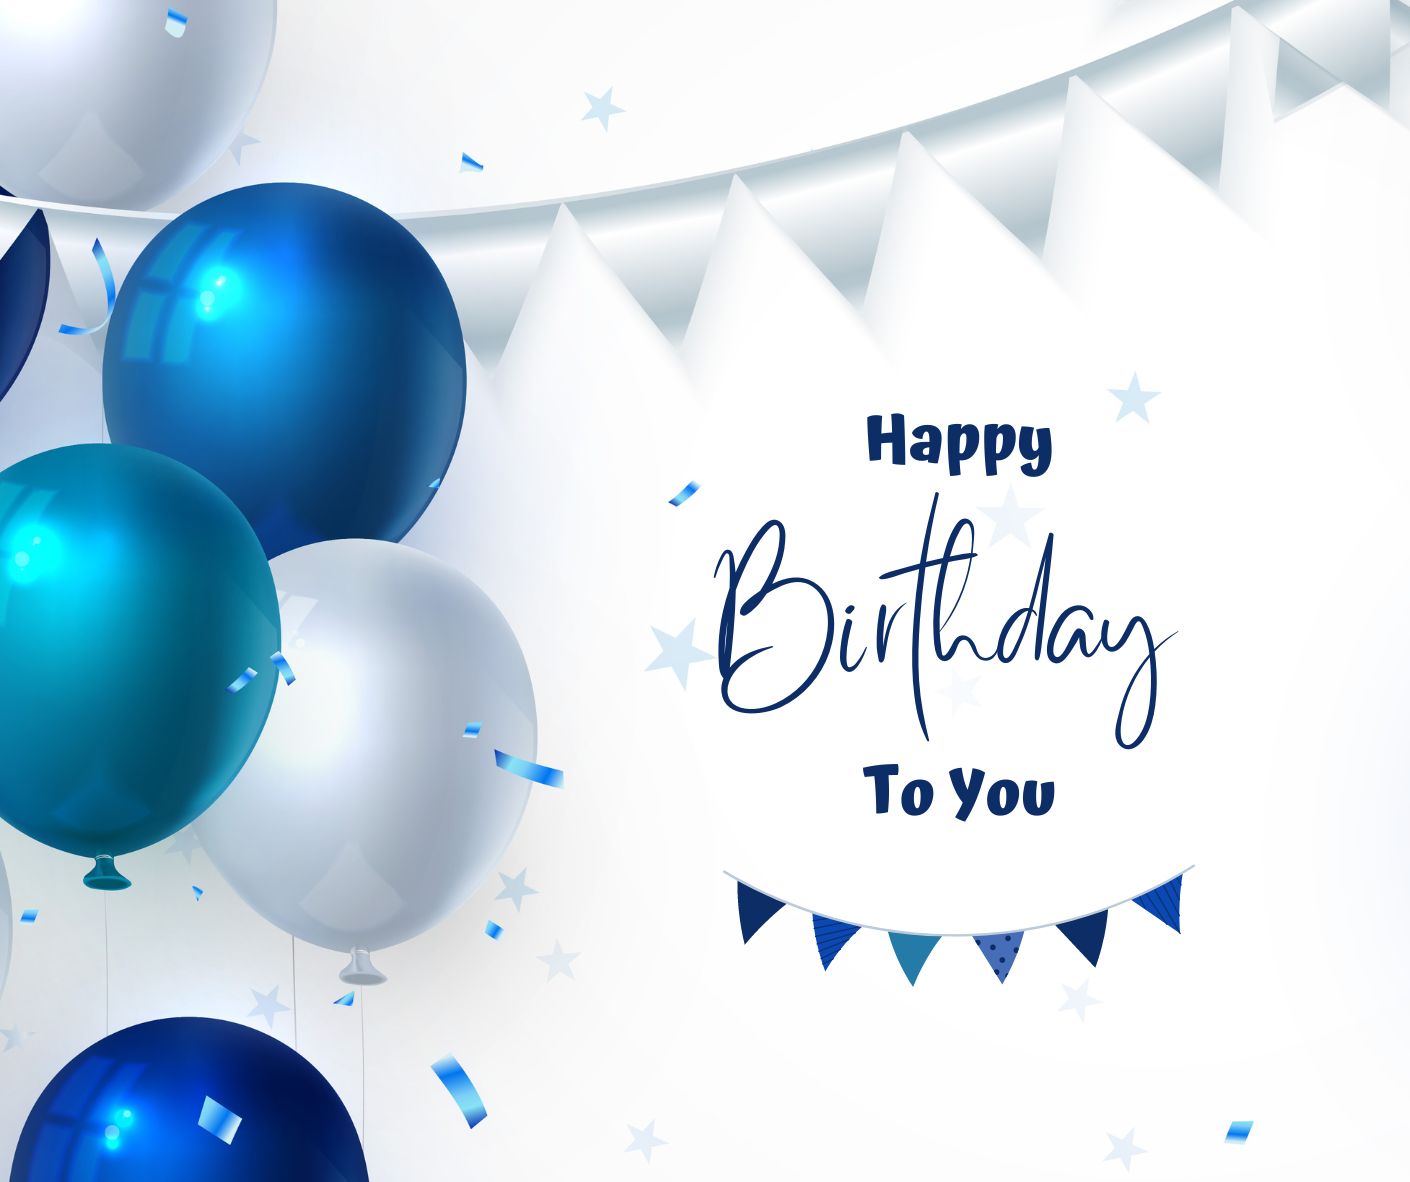 Happy Birthday Messages With Images And Pictures - 2023